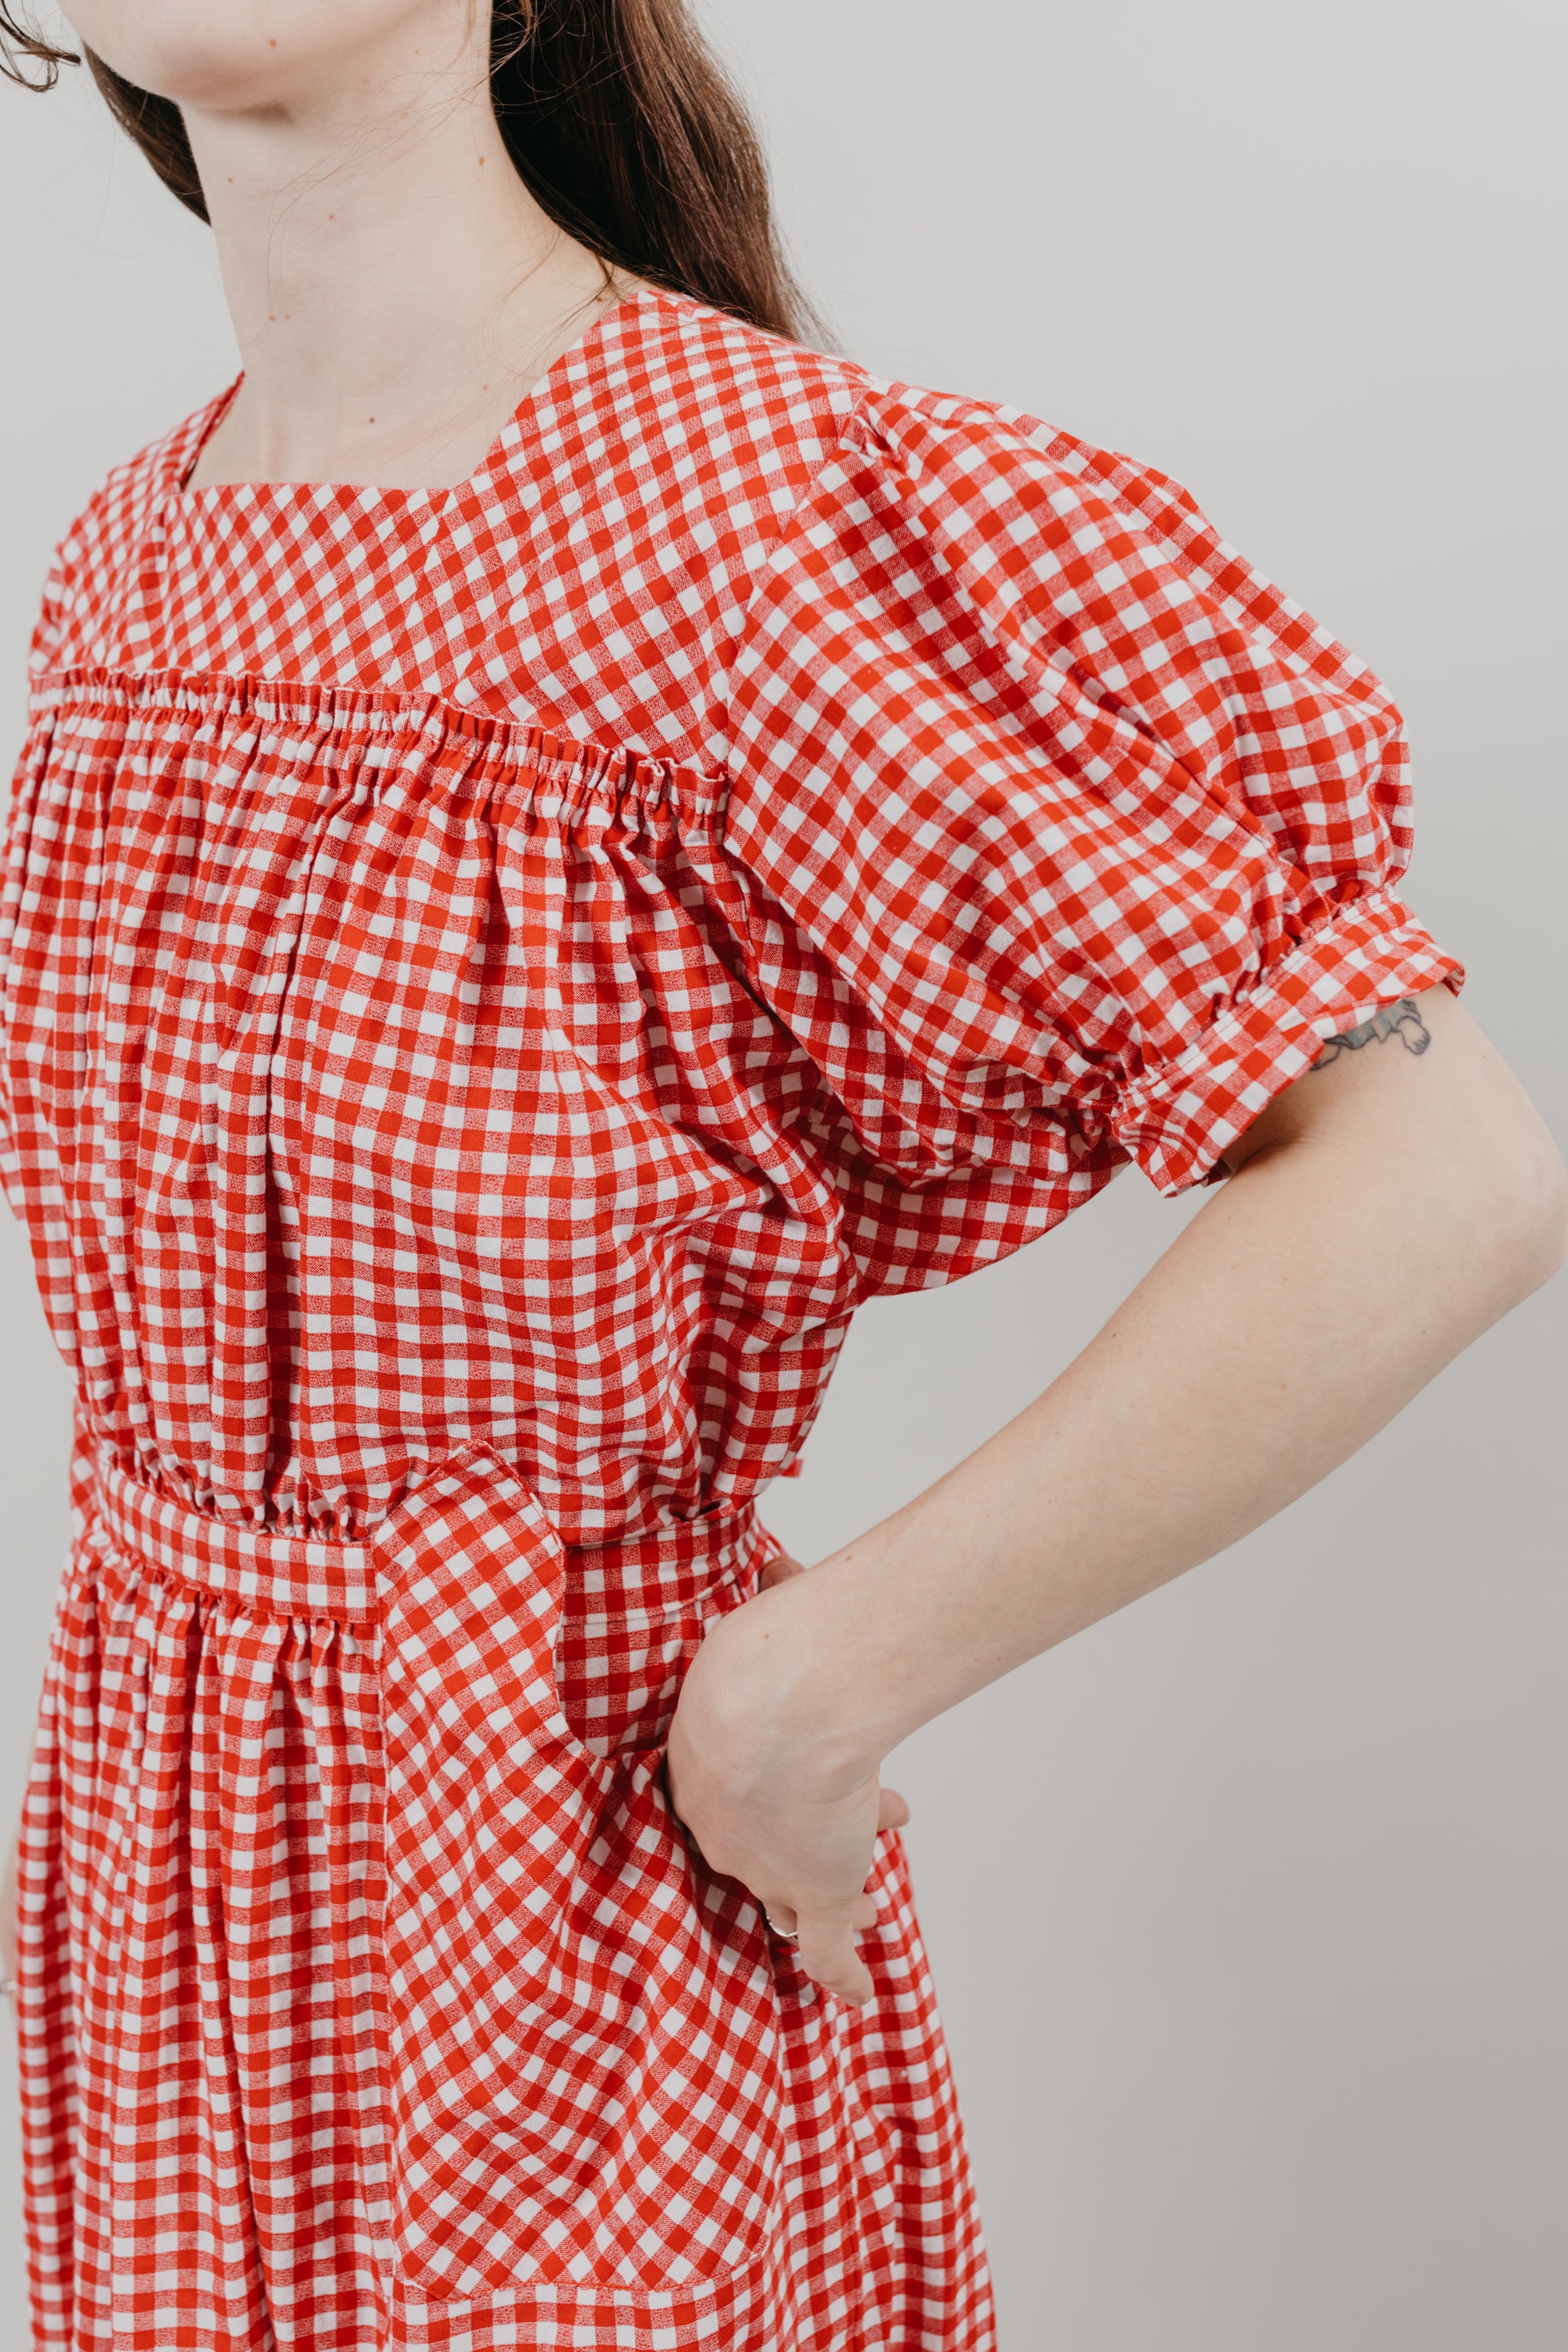 Close up of Japanese American woman standing in front of a white background wearing a red and white gingham calf-length dress with puffed sleeves, and a flounce.  Dress is belted at the waist and has pockets cut on the bias.